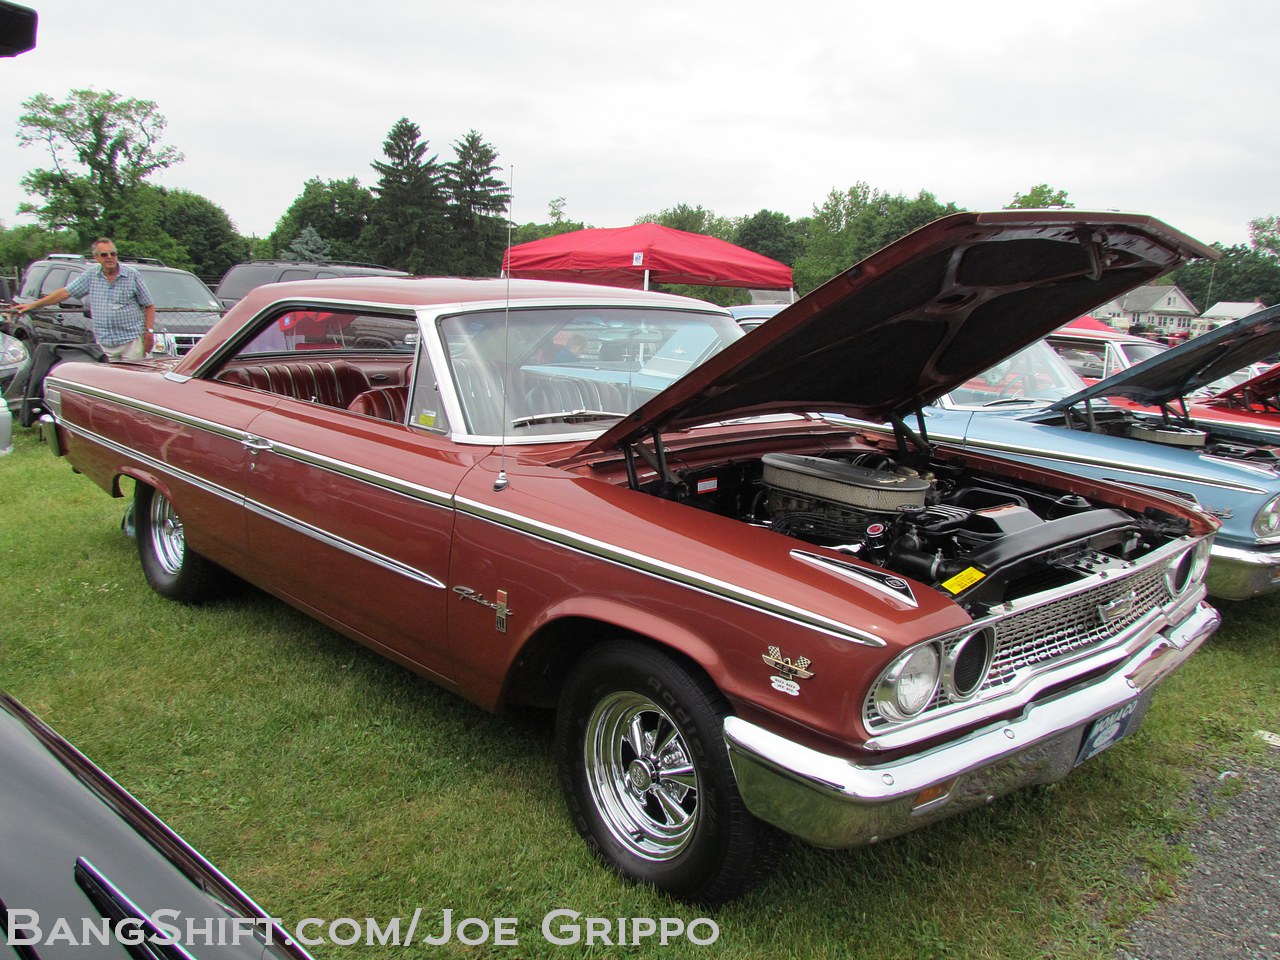 Carlisle all ford nationals 2013 #6